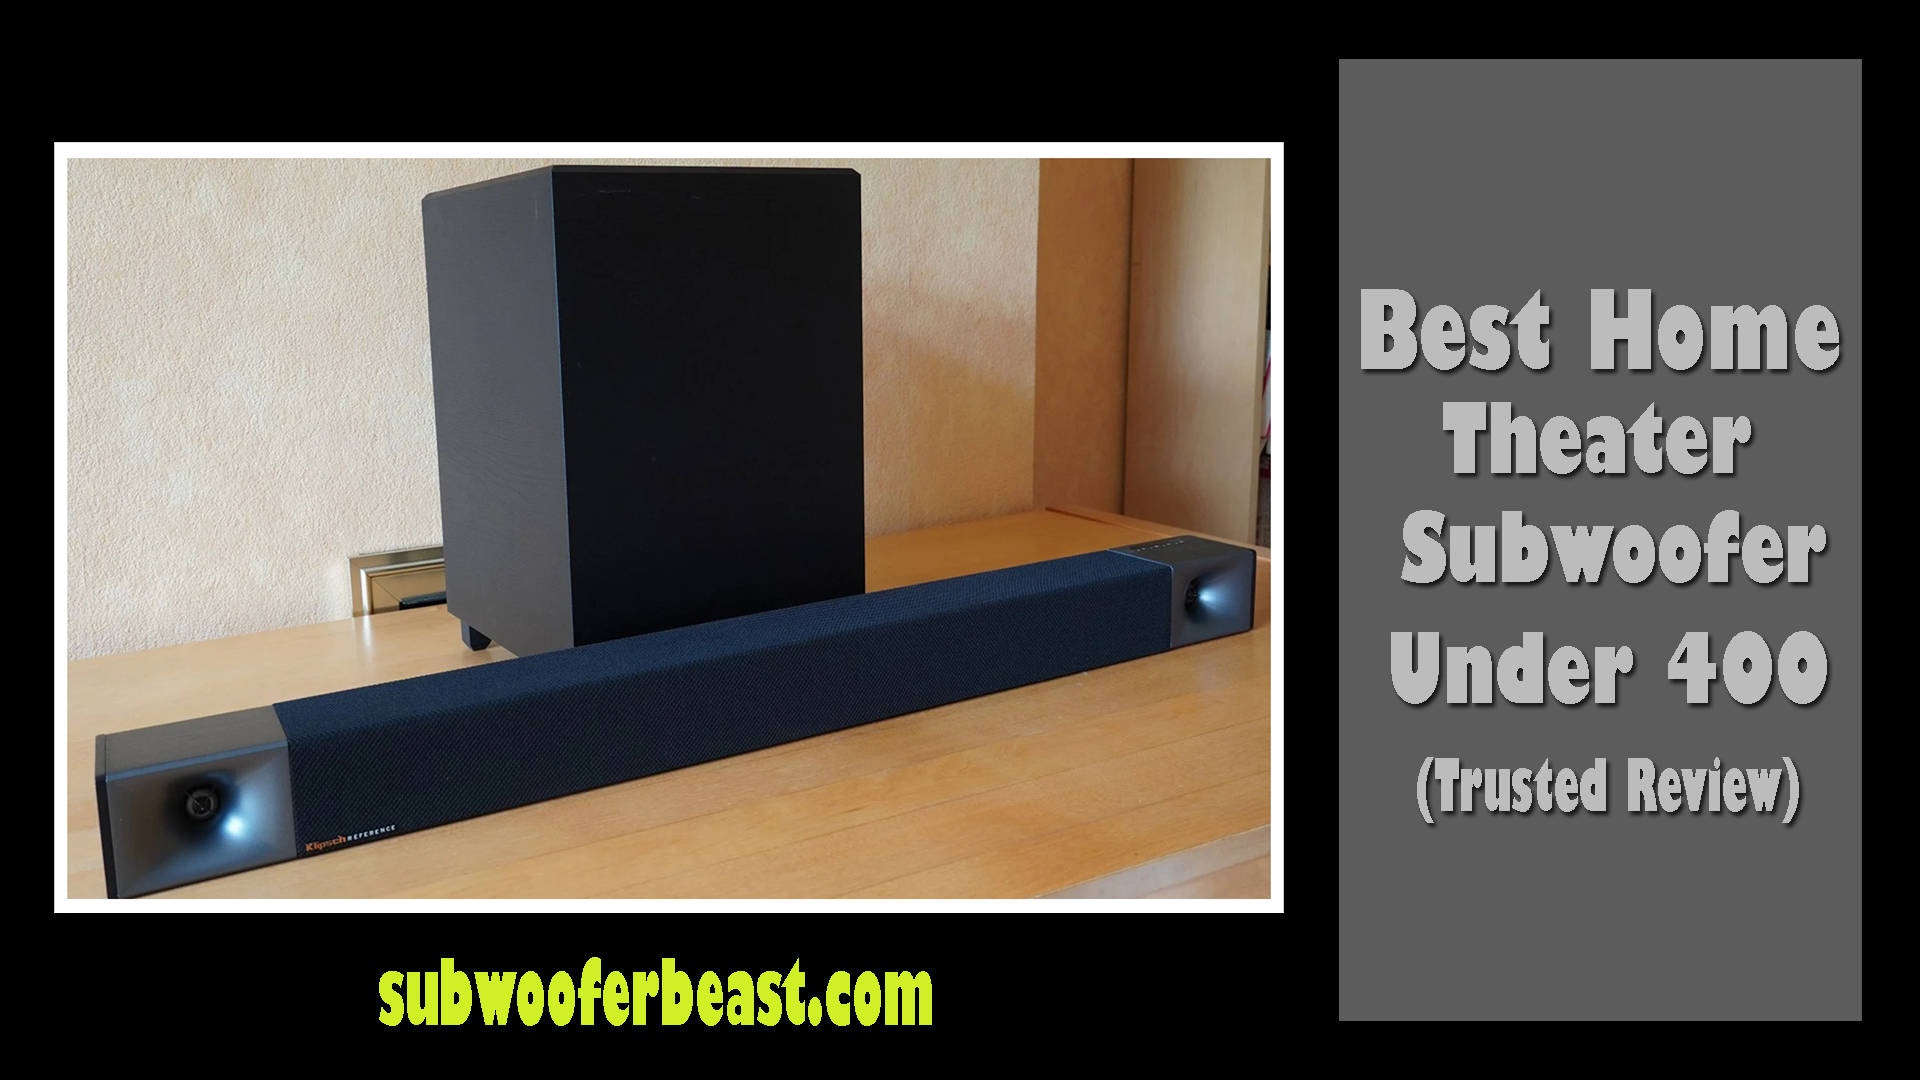 Best Home Theater Subwoofer Under 400 (Trusted Review)